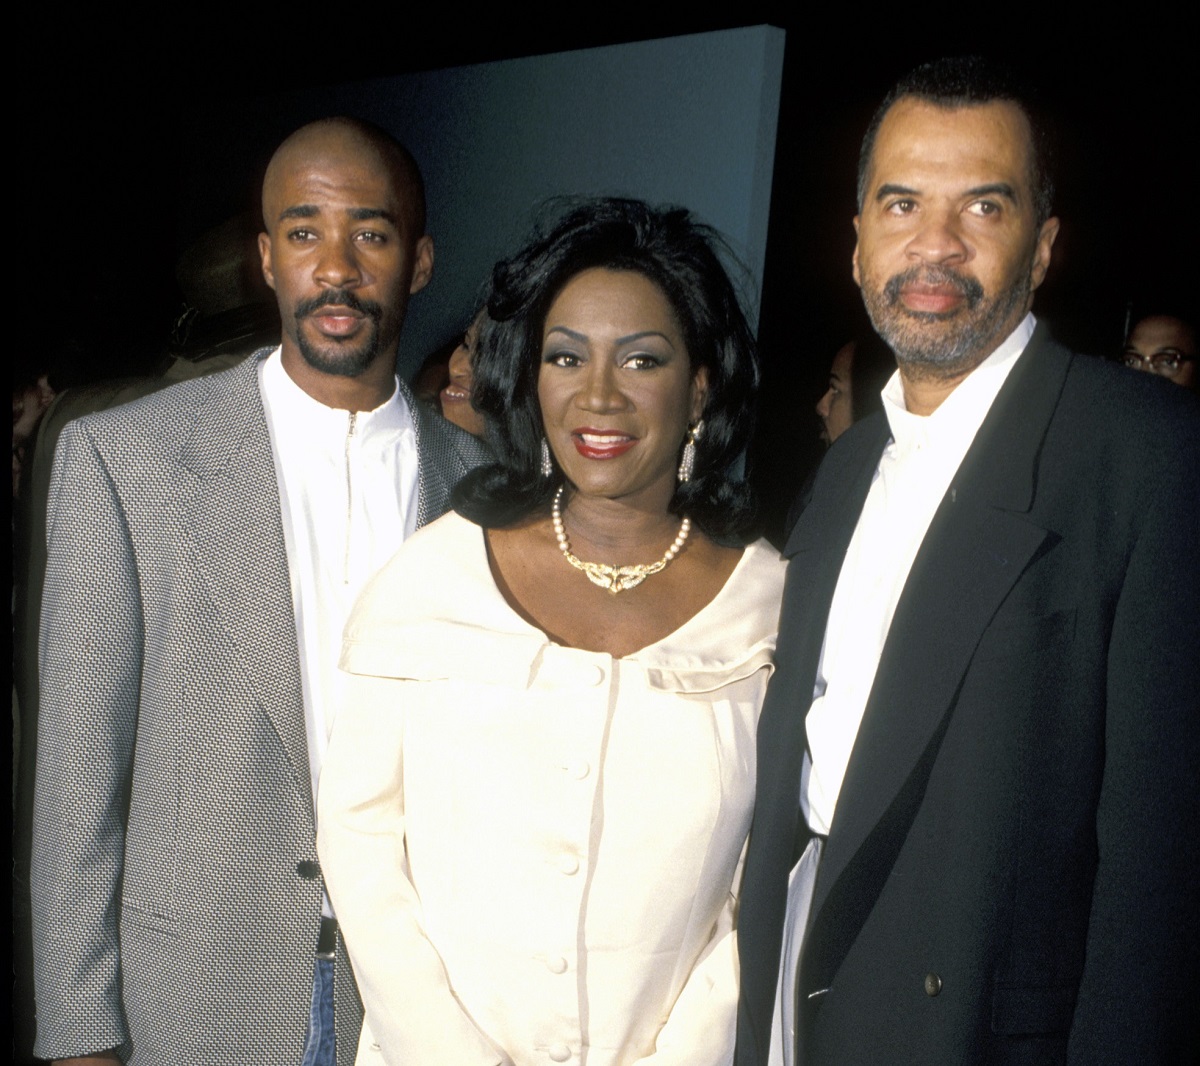 Patti LaBelle and Armstead Edwards pose for photo with their son Zuri at a premiere in 1992